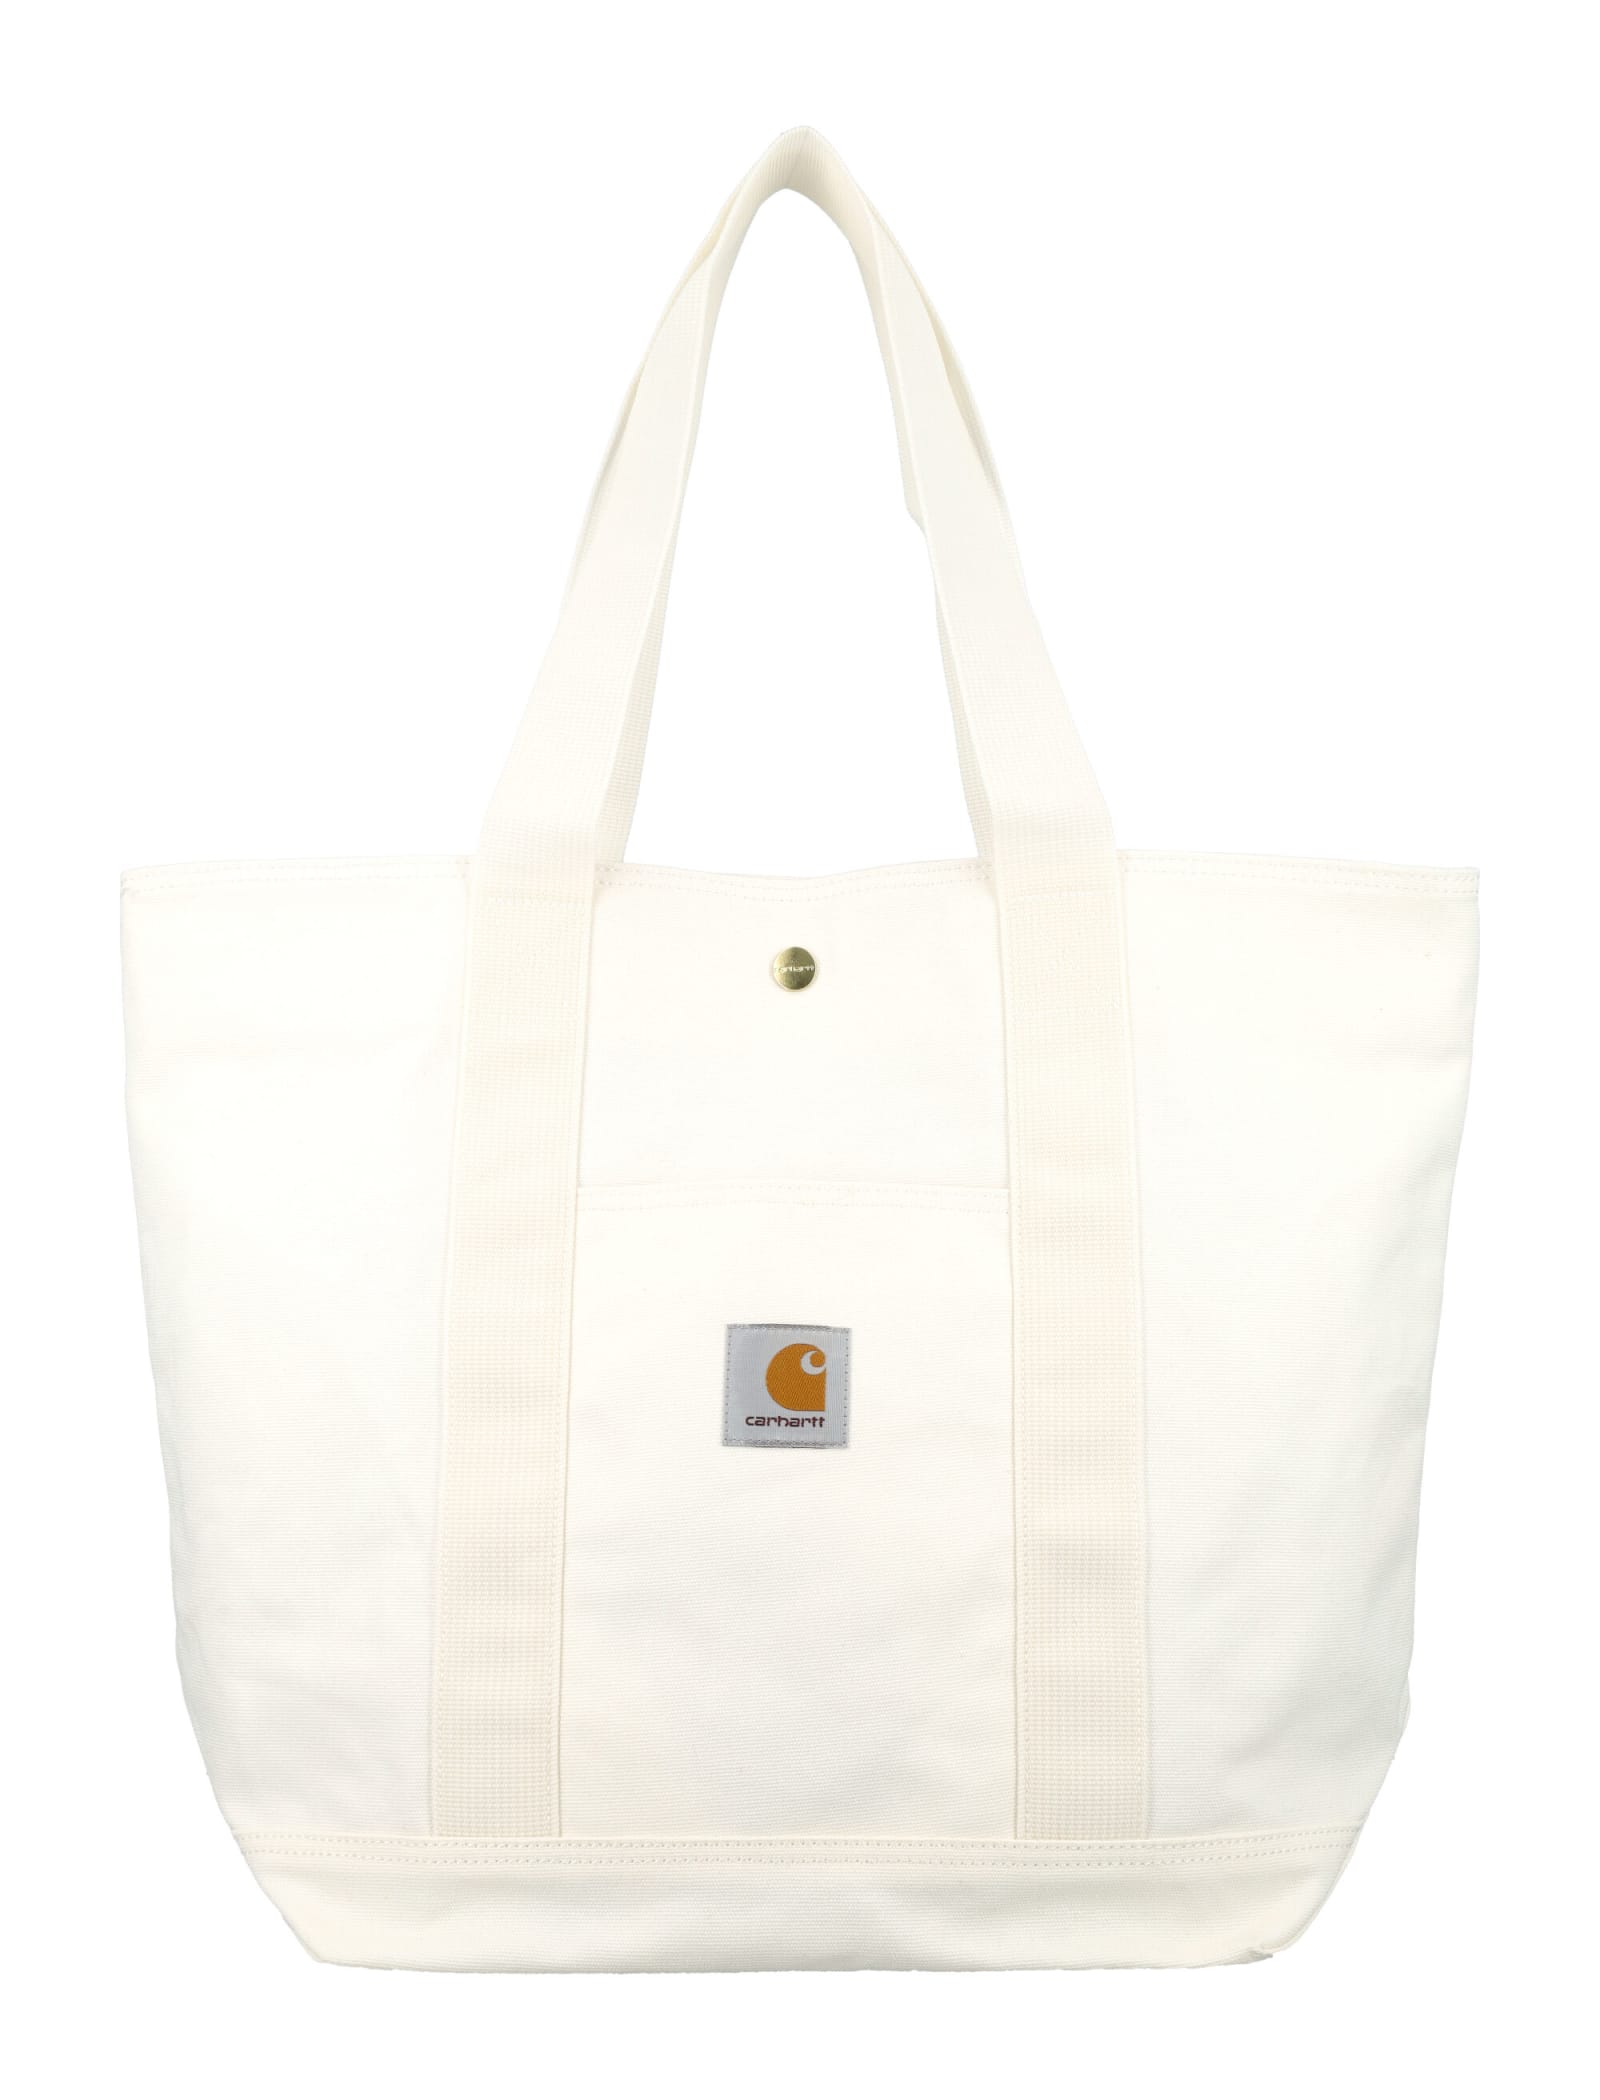 Carhartt Canvas Tote Bag In Wax Rinsed